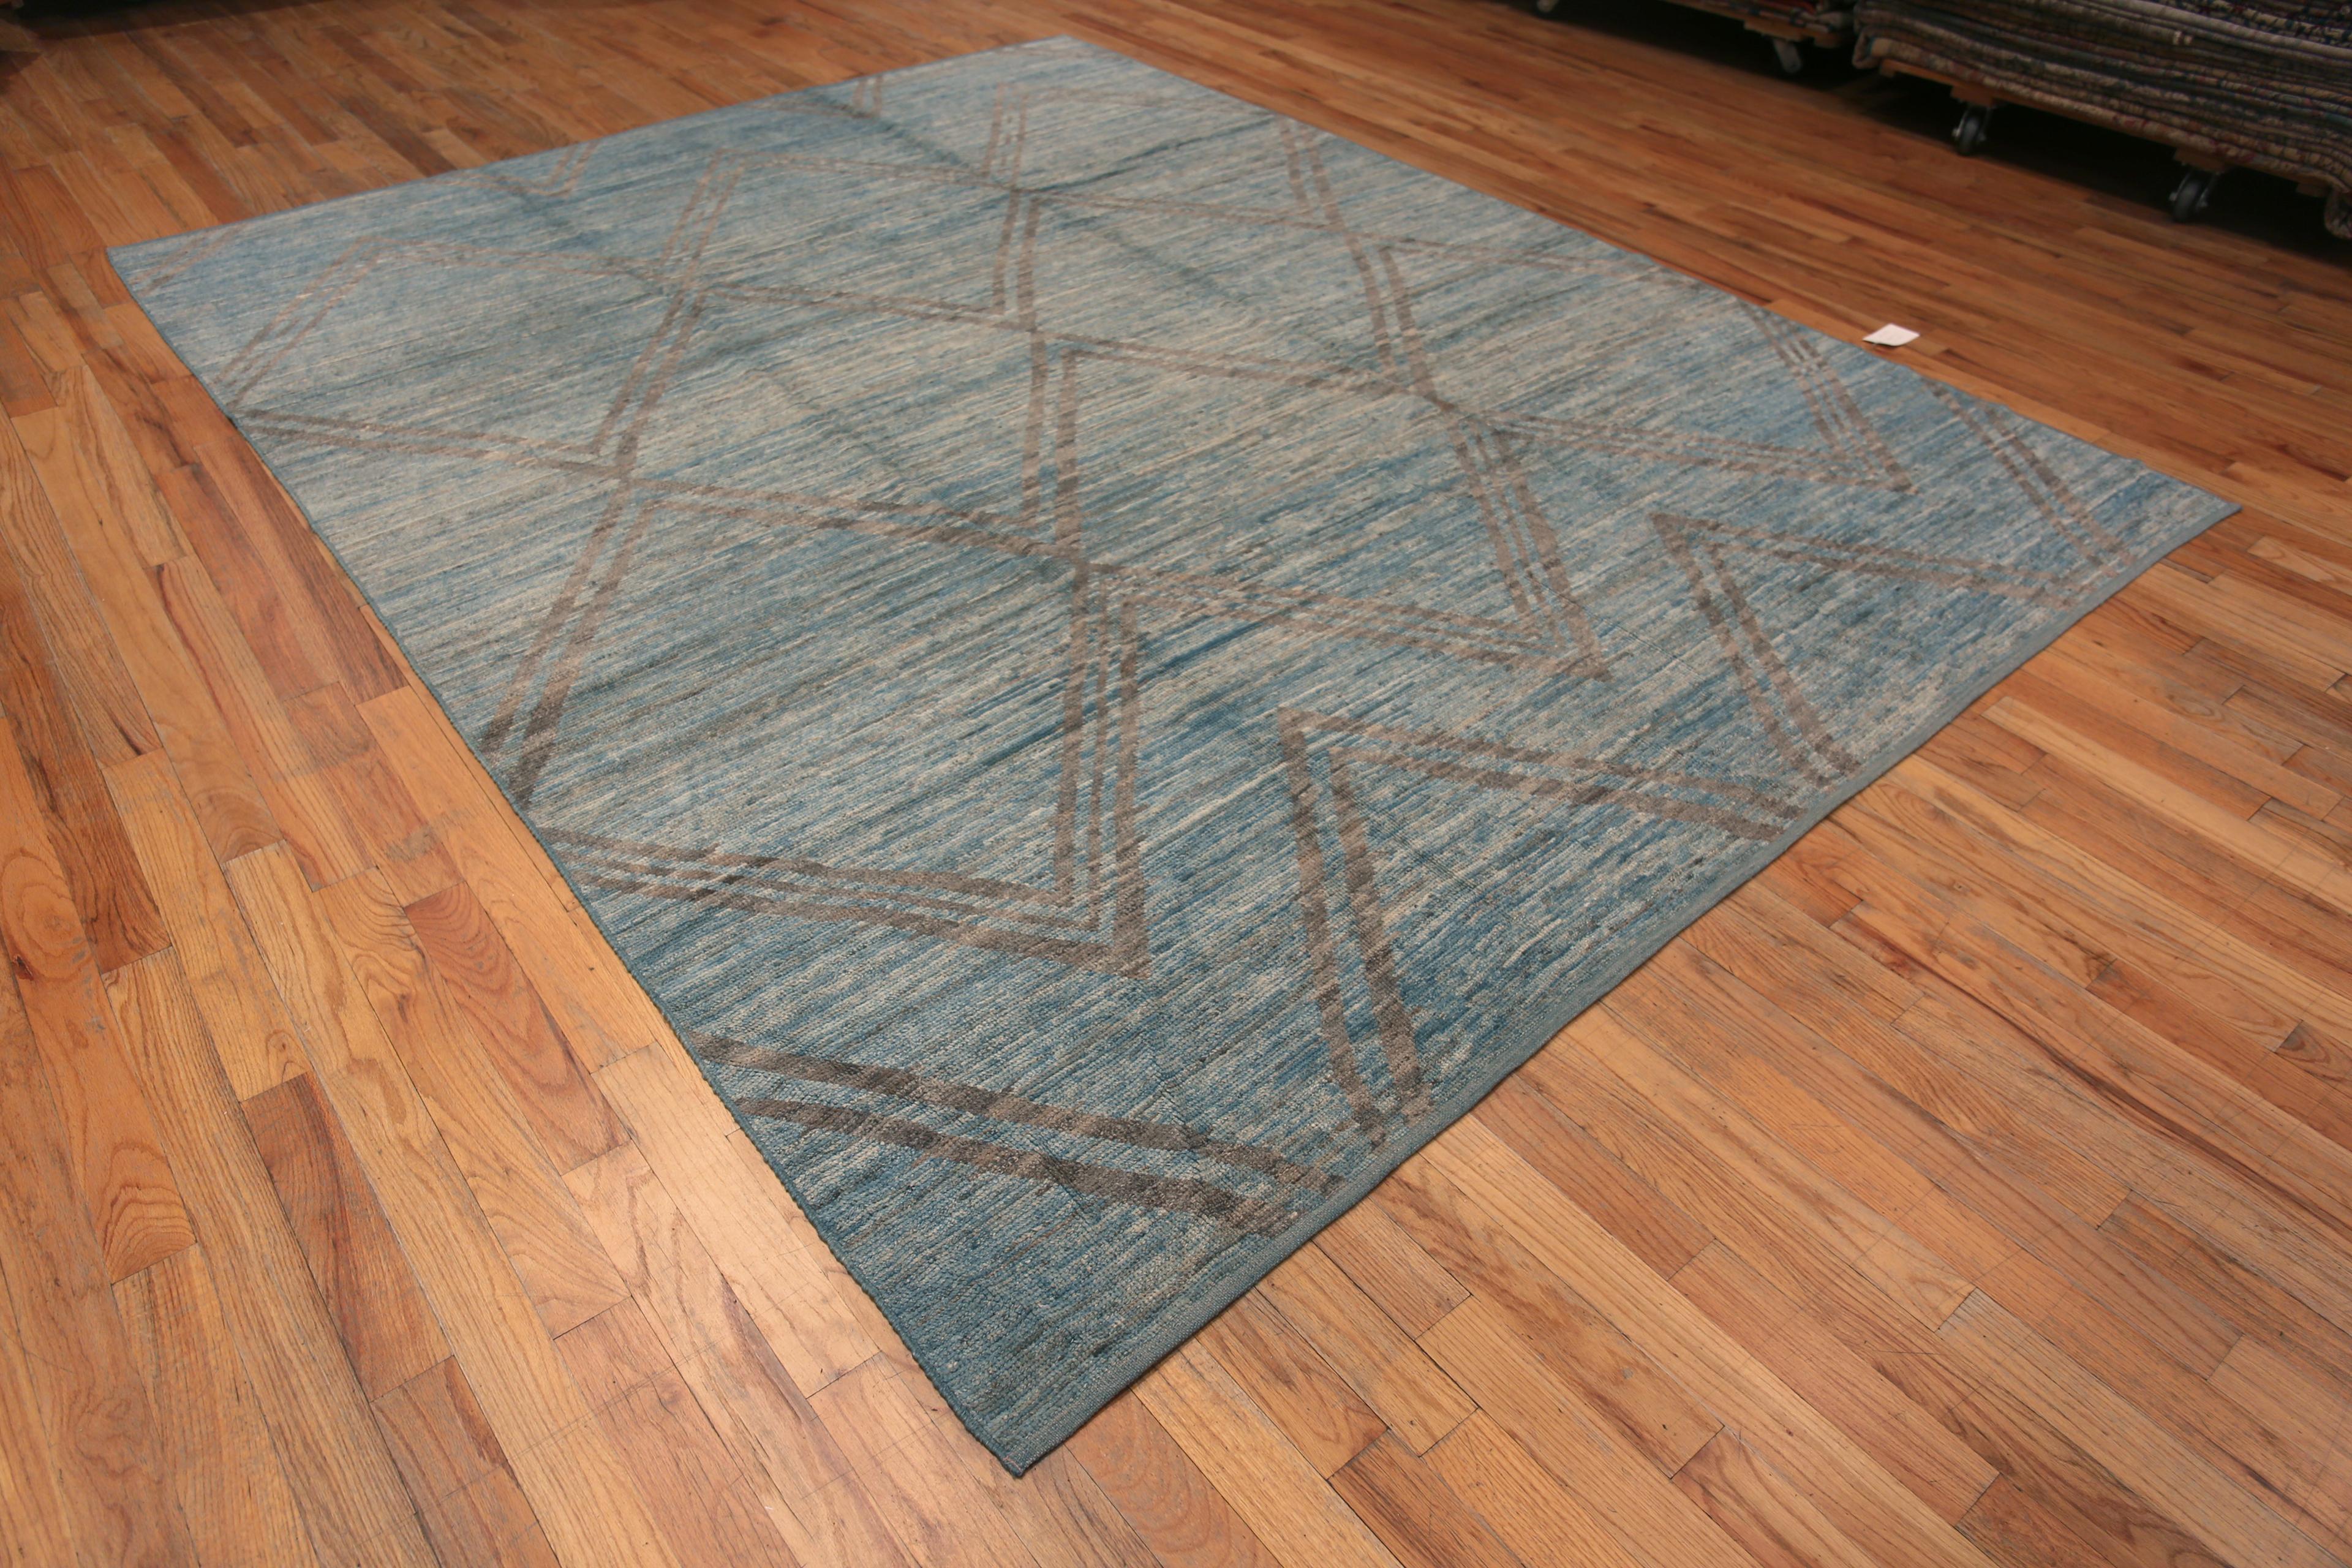 A Magnificent Artistic Light Blue Abrash Background Brown Geometric Diamond Pattern Modern Area Rug, Country of Origin: Central Asia, Circa Date: Modern Rug 